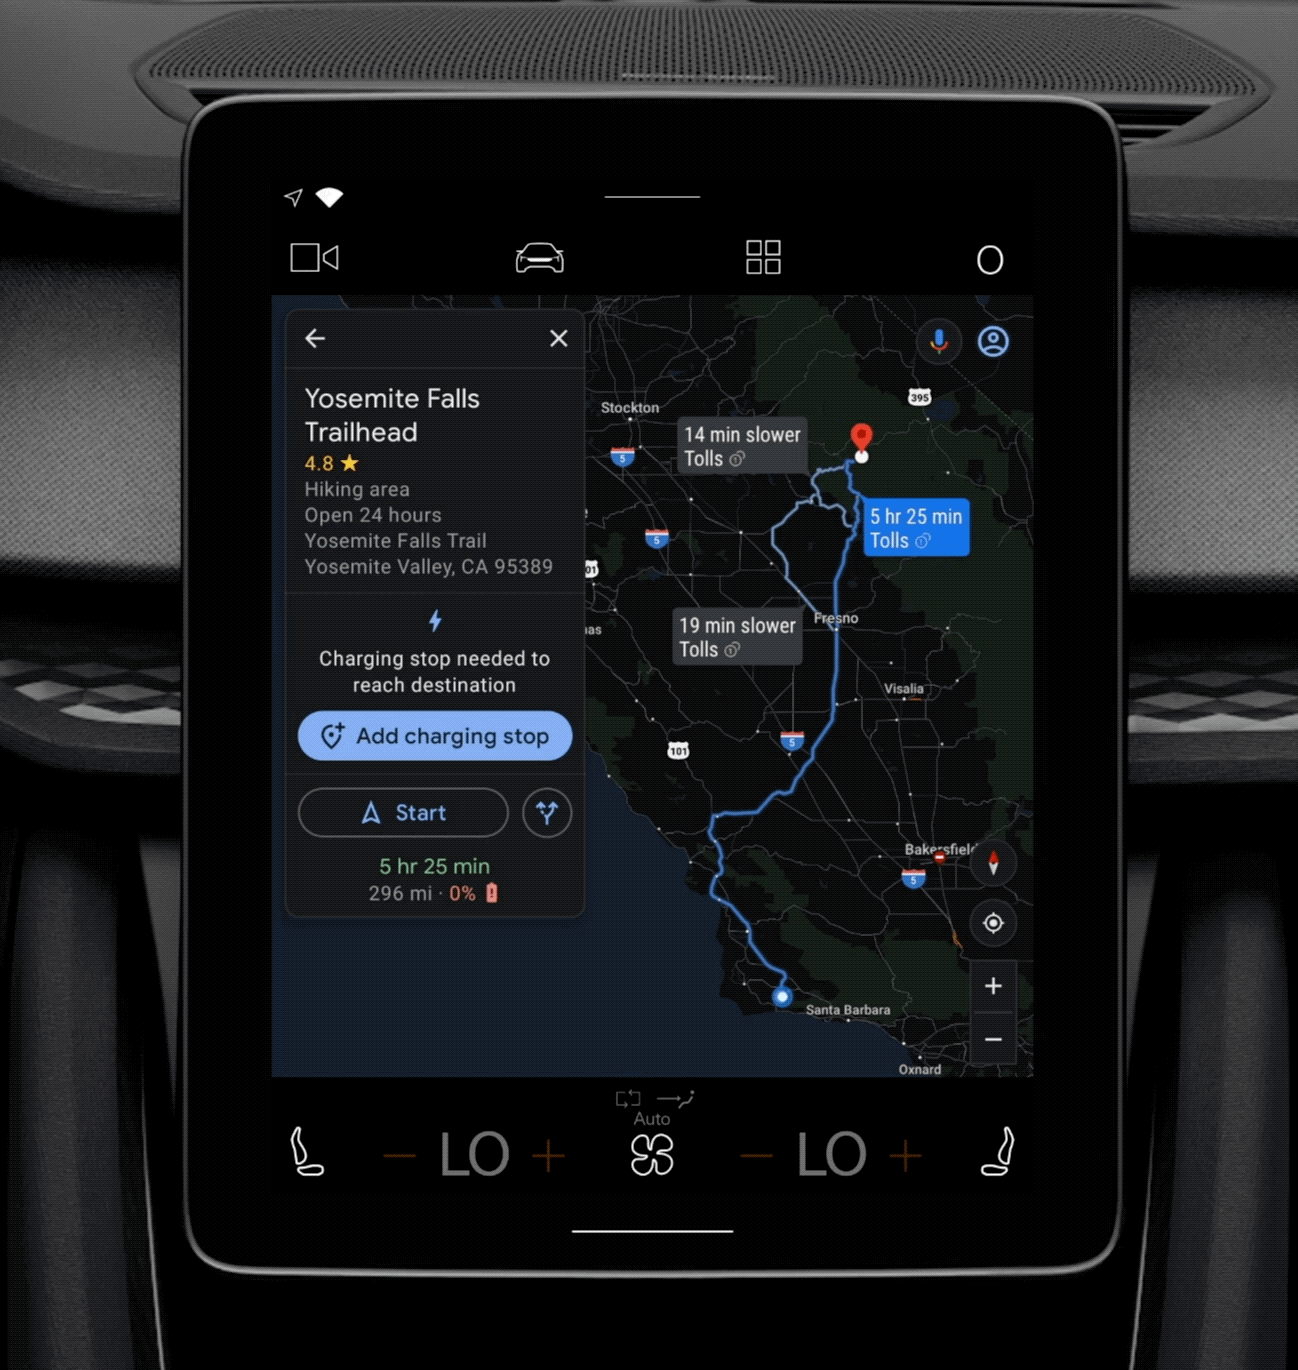 Image of Google Maps built in to an electric vehicle showing that you can add a stop to charge the vehicle on route to Yosemite Falls Trailhead.